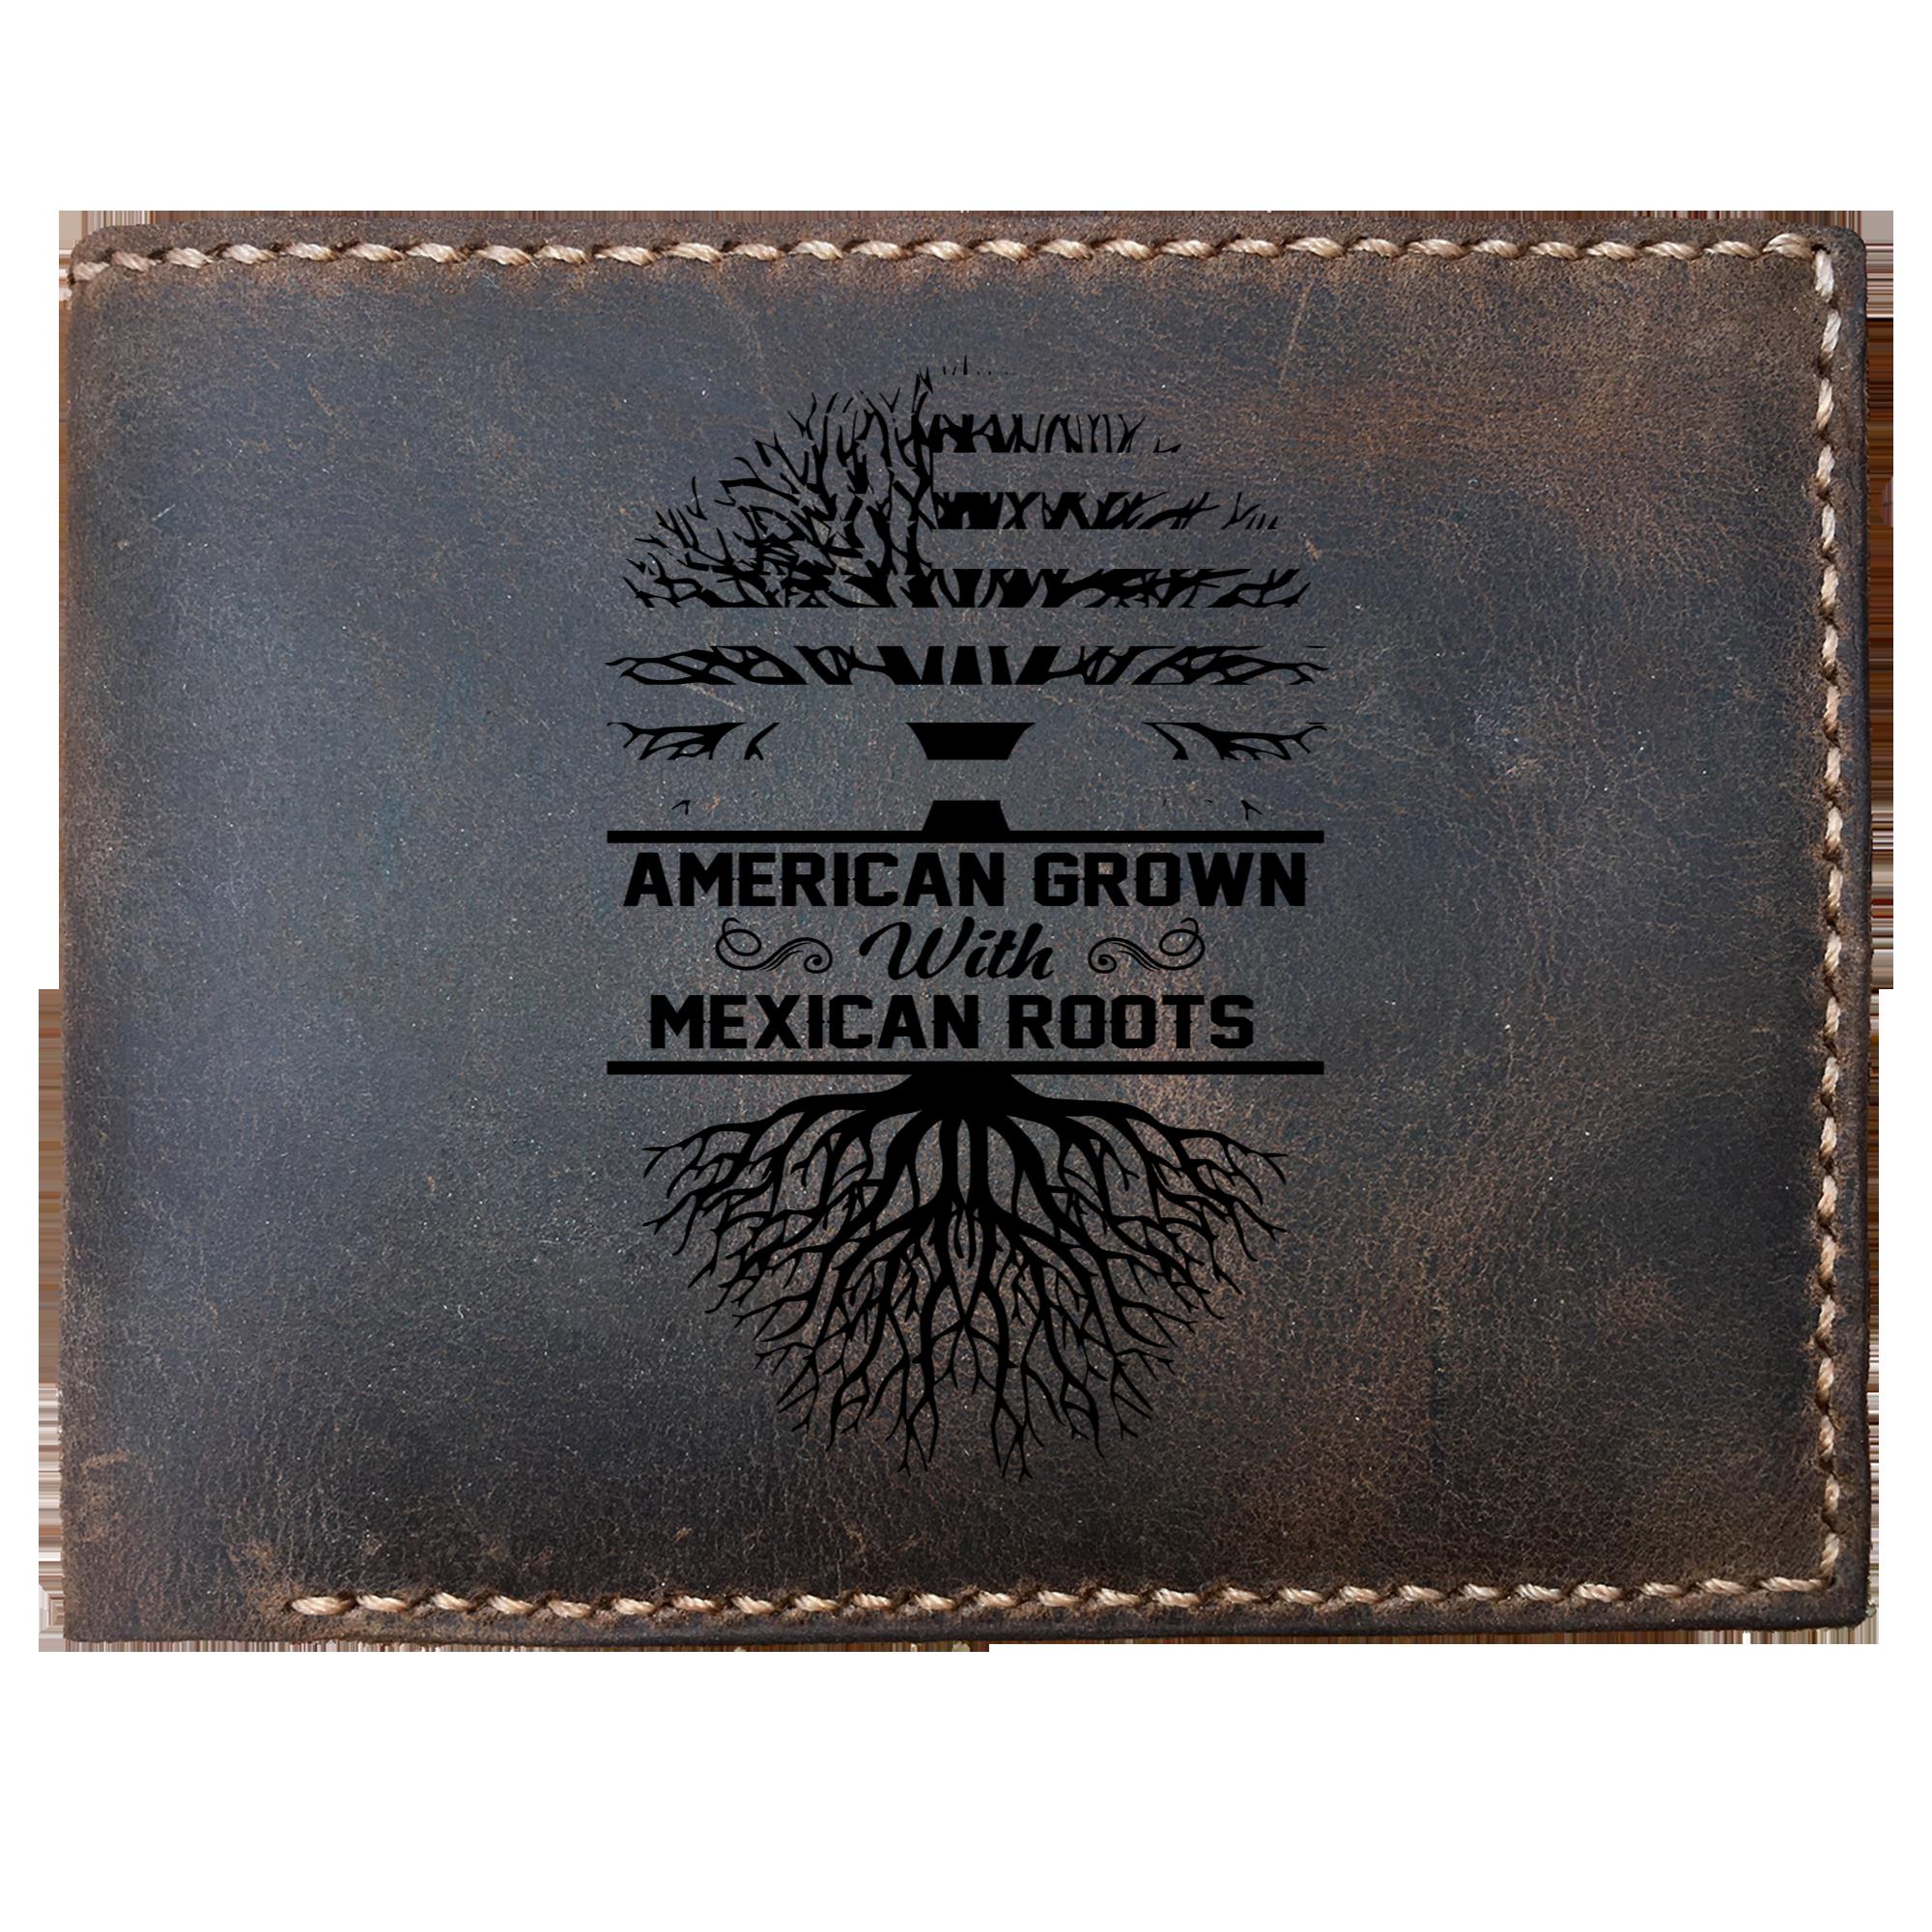 Skitongifts Funny Custom Laser Engraved Bifold Leather Wallet For Men, American Grown With Mexican Roots Meaning Birthday